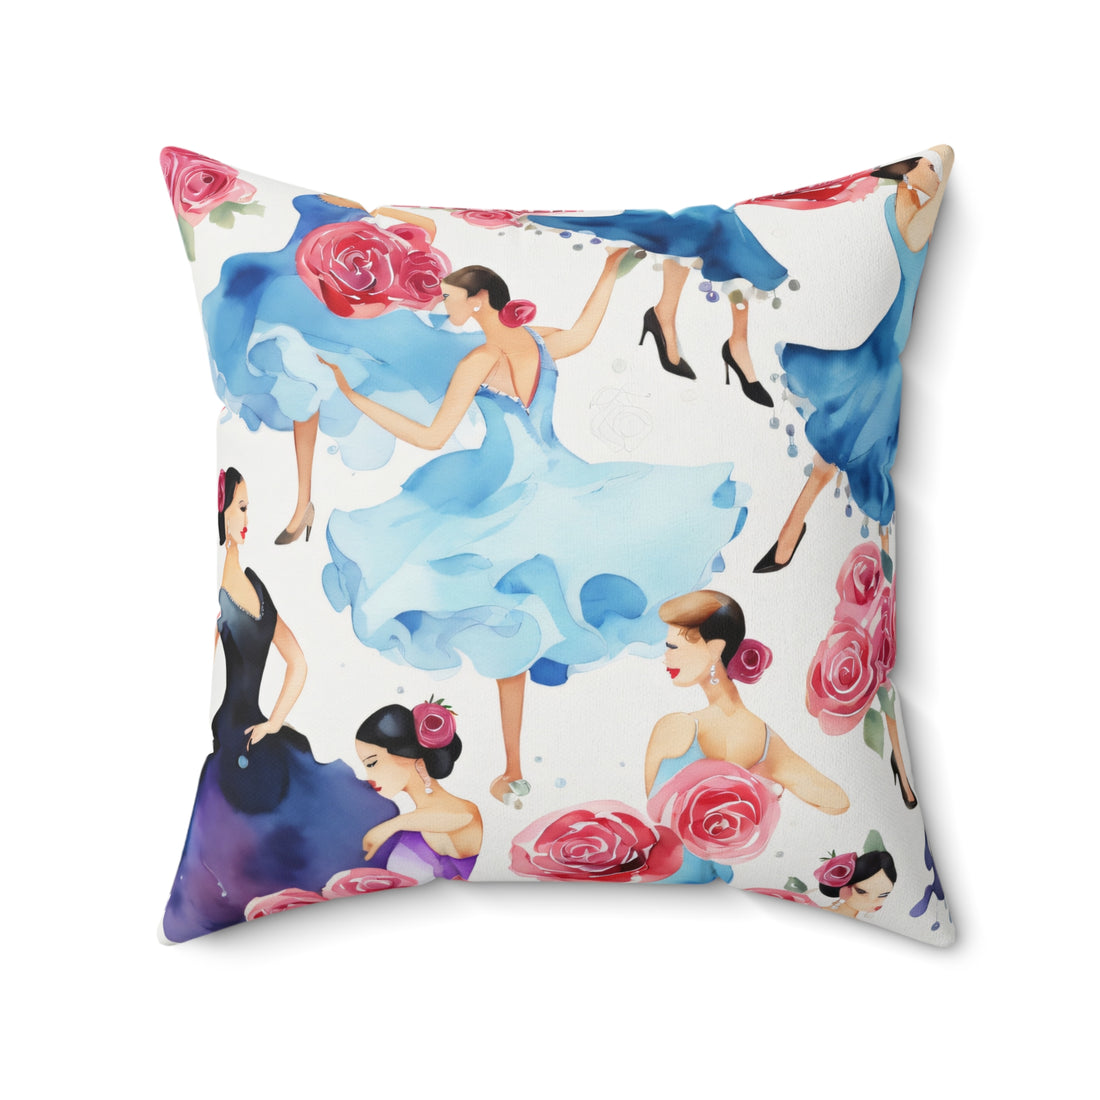 Flamenco Dancer Pillow in Blue and Black with Roses from Yumigara